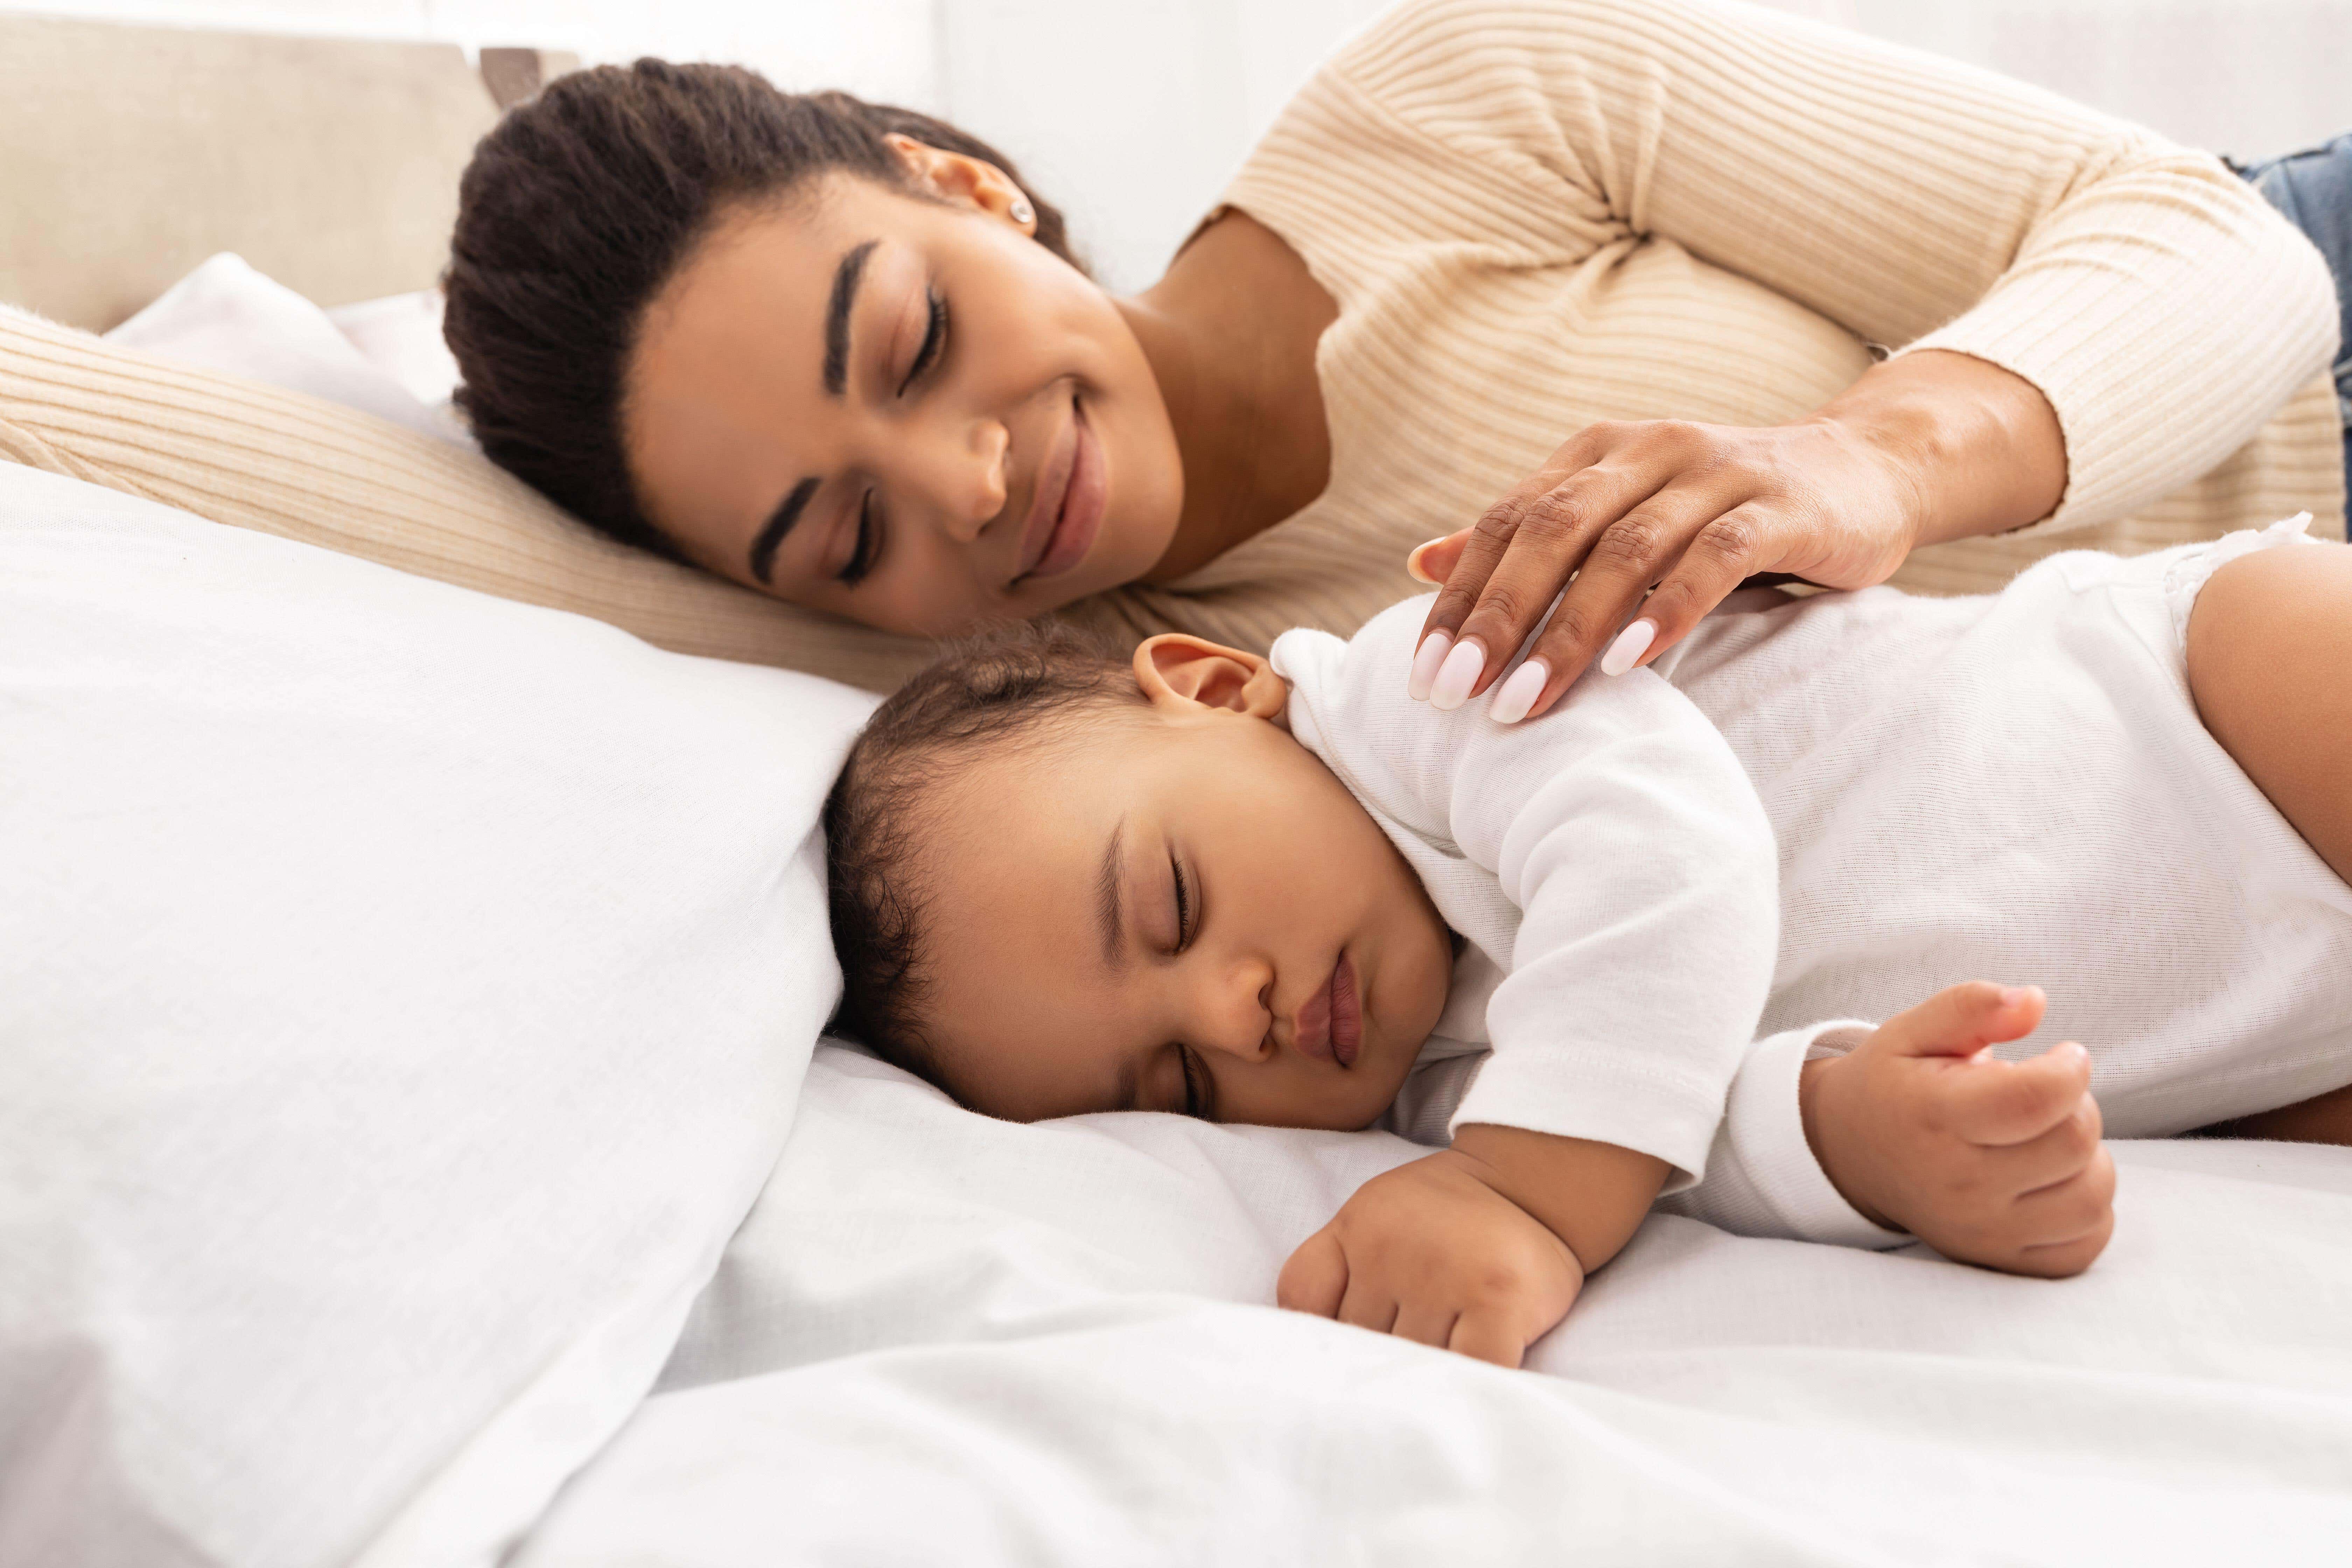 How to stop co-sleeping: An age-by-age guide - Today's Parent